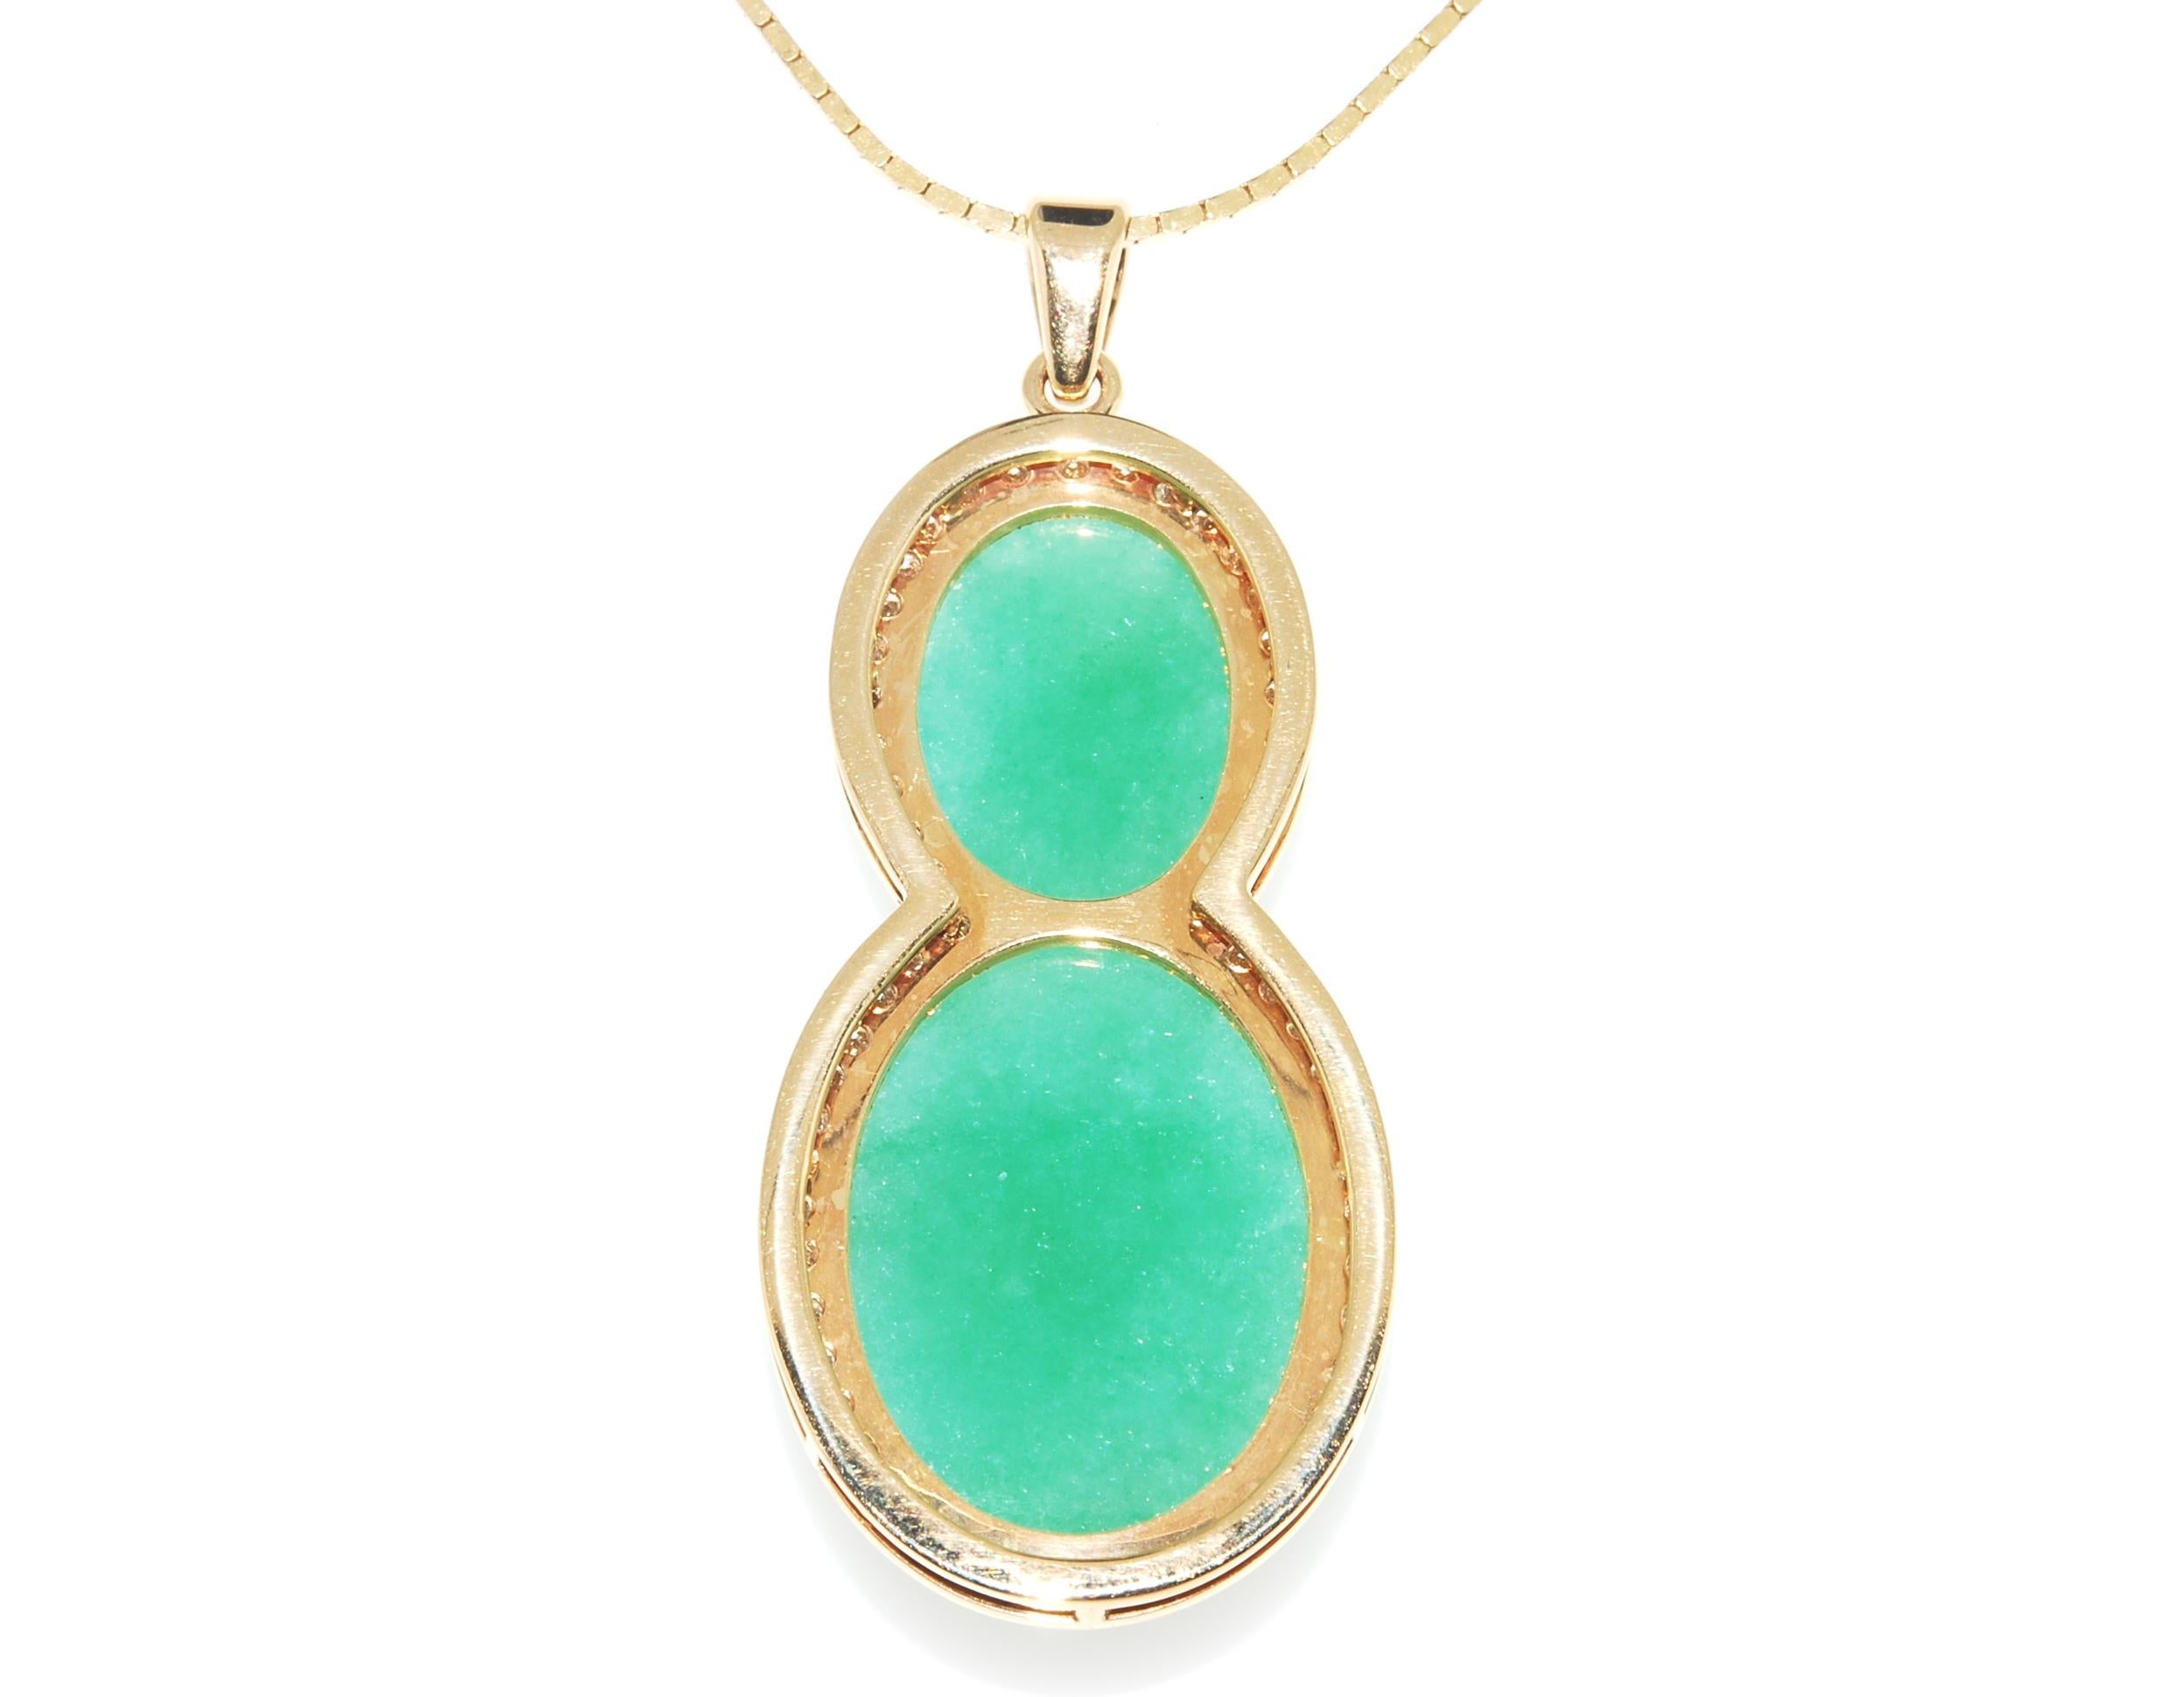 A beautiful Jadeite Jade pendant - with a lab report from Mason Kay - the leaders in Jade analysis. The Jadeites are set in 14 karat yellow gold. Larger piece is 22.26mm's x 16.2 mm's - the smaller 14.90 x 11.40mm's. They are framed in 14 karat